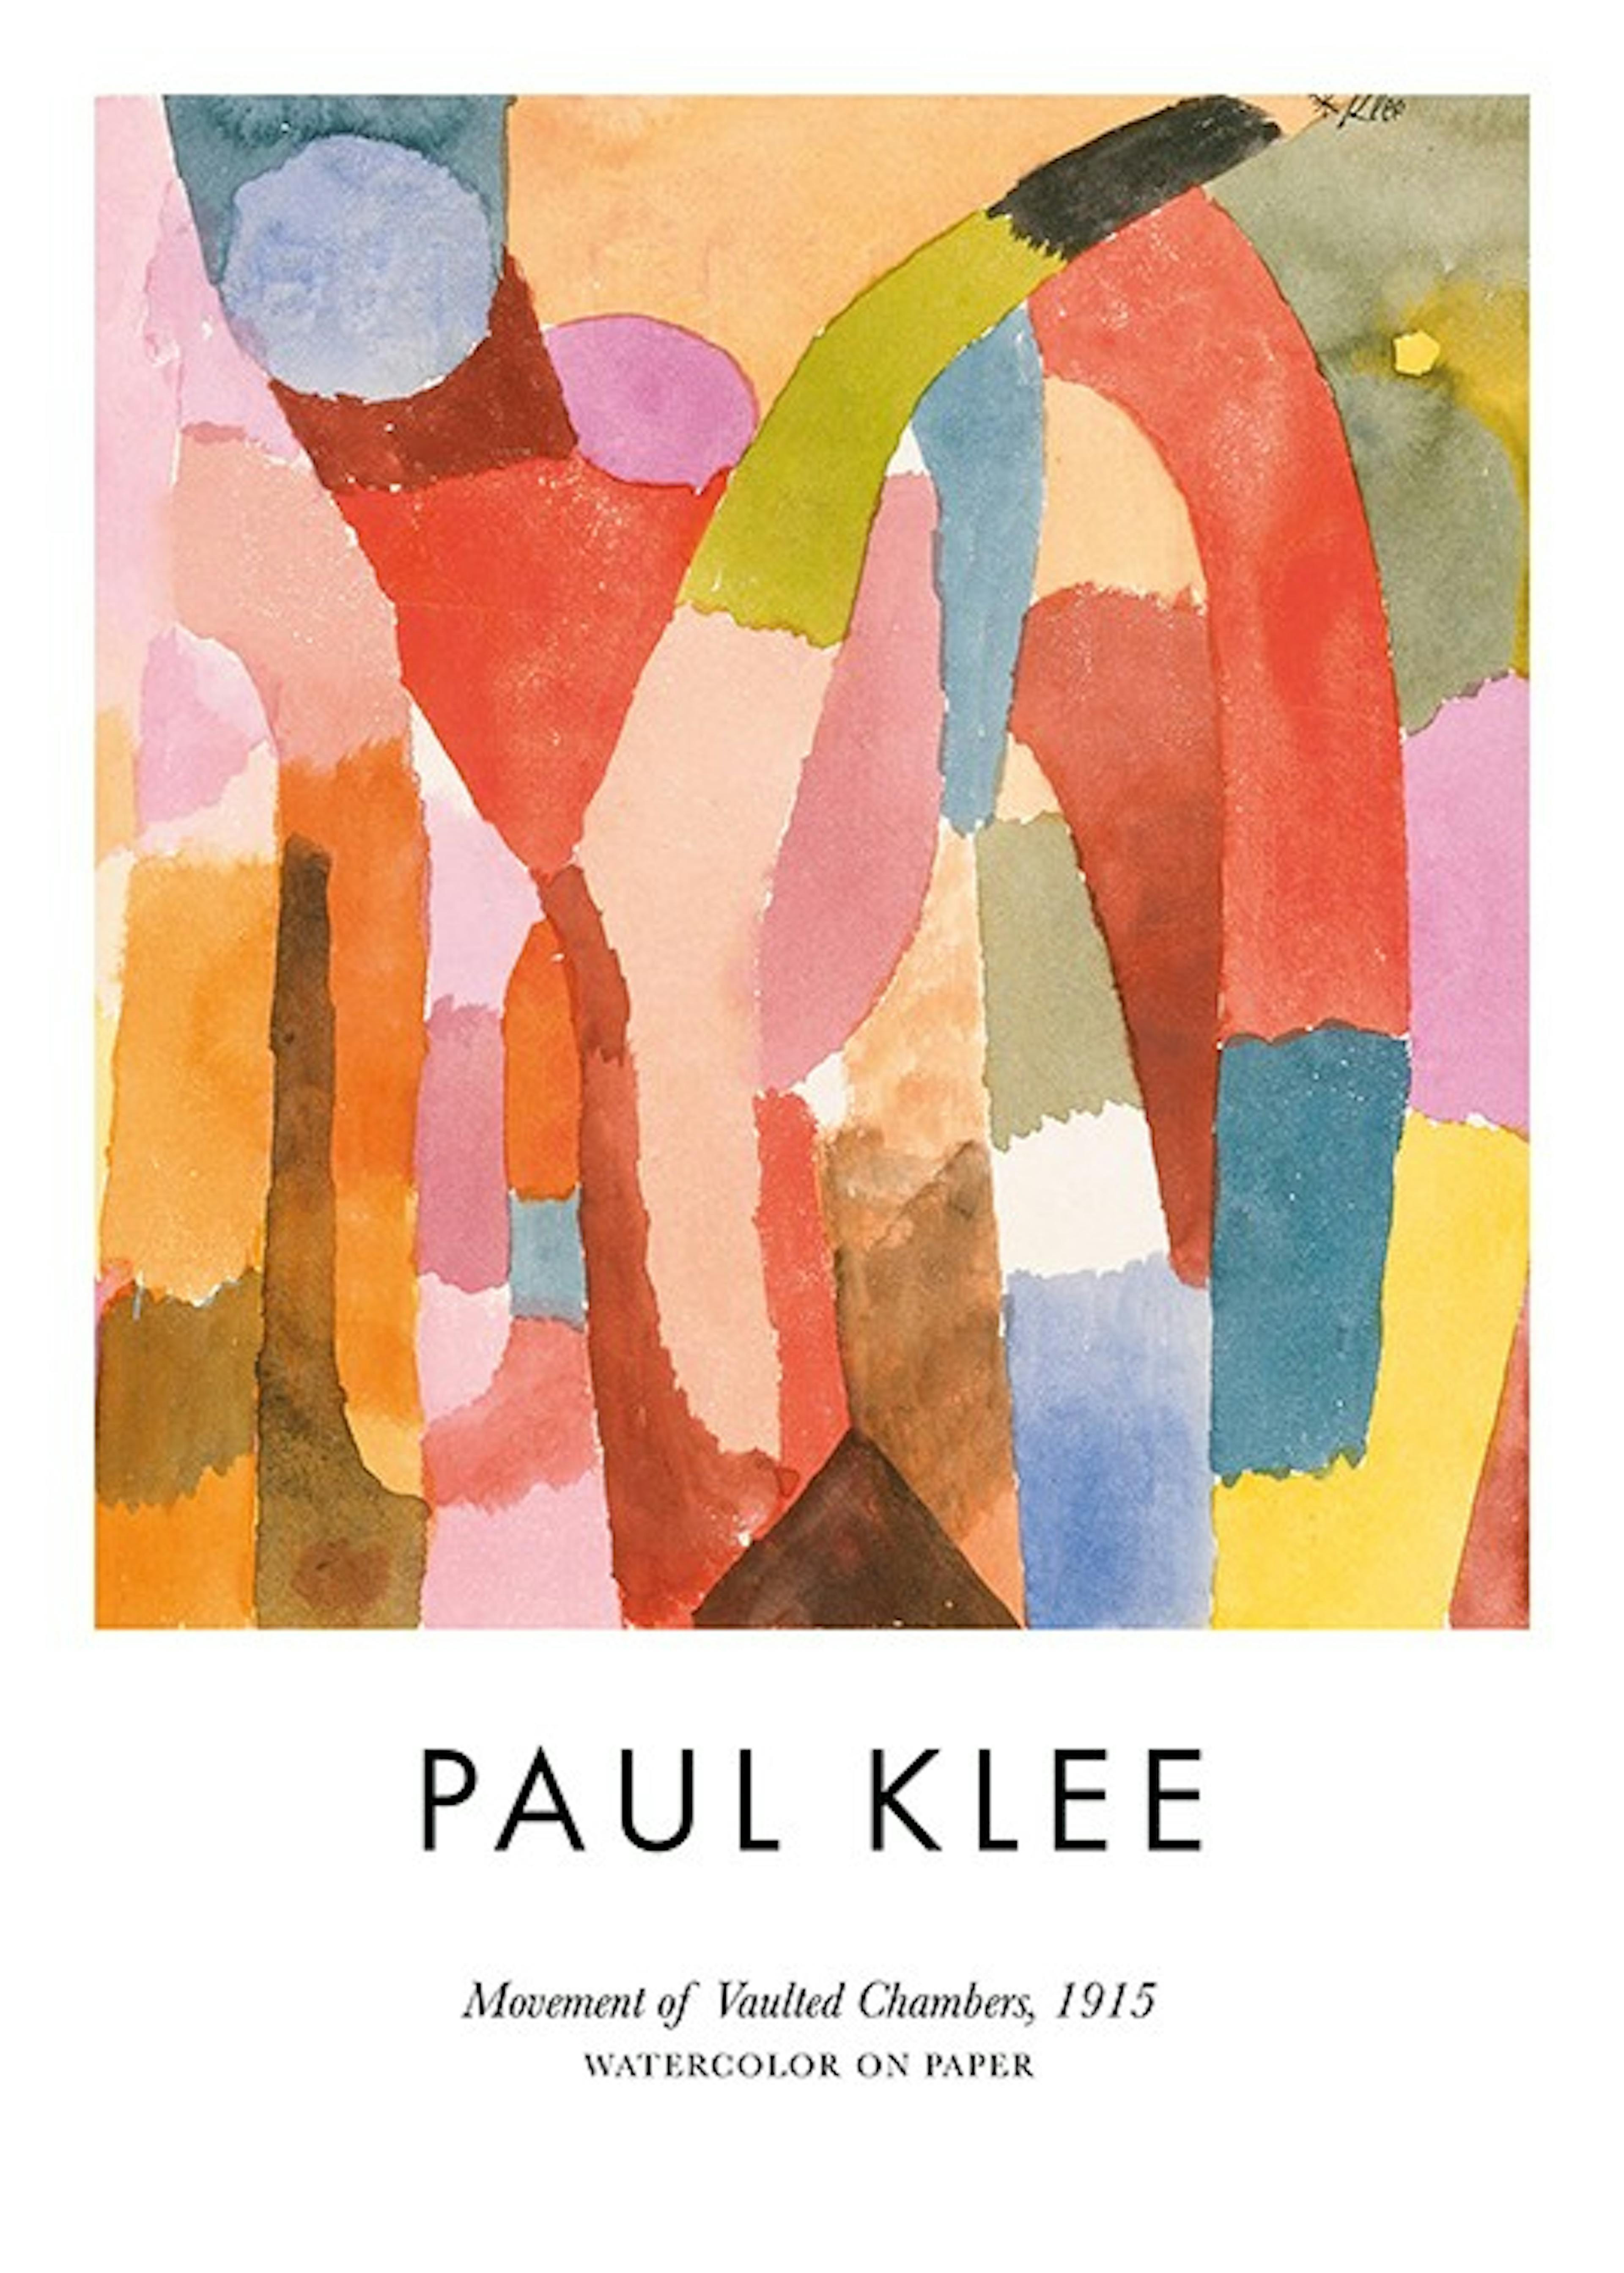 Paul Klee - Movement of Vaulted Chambers Juliste 0